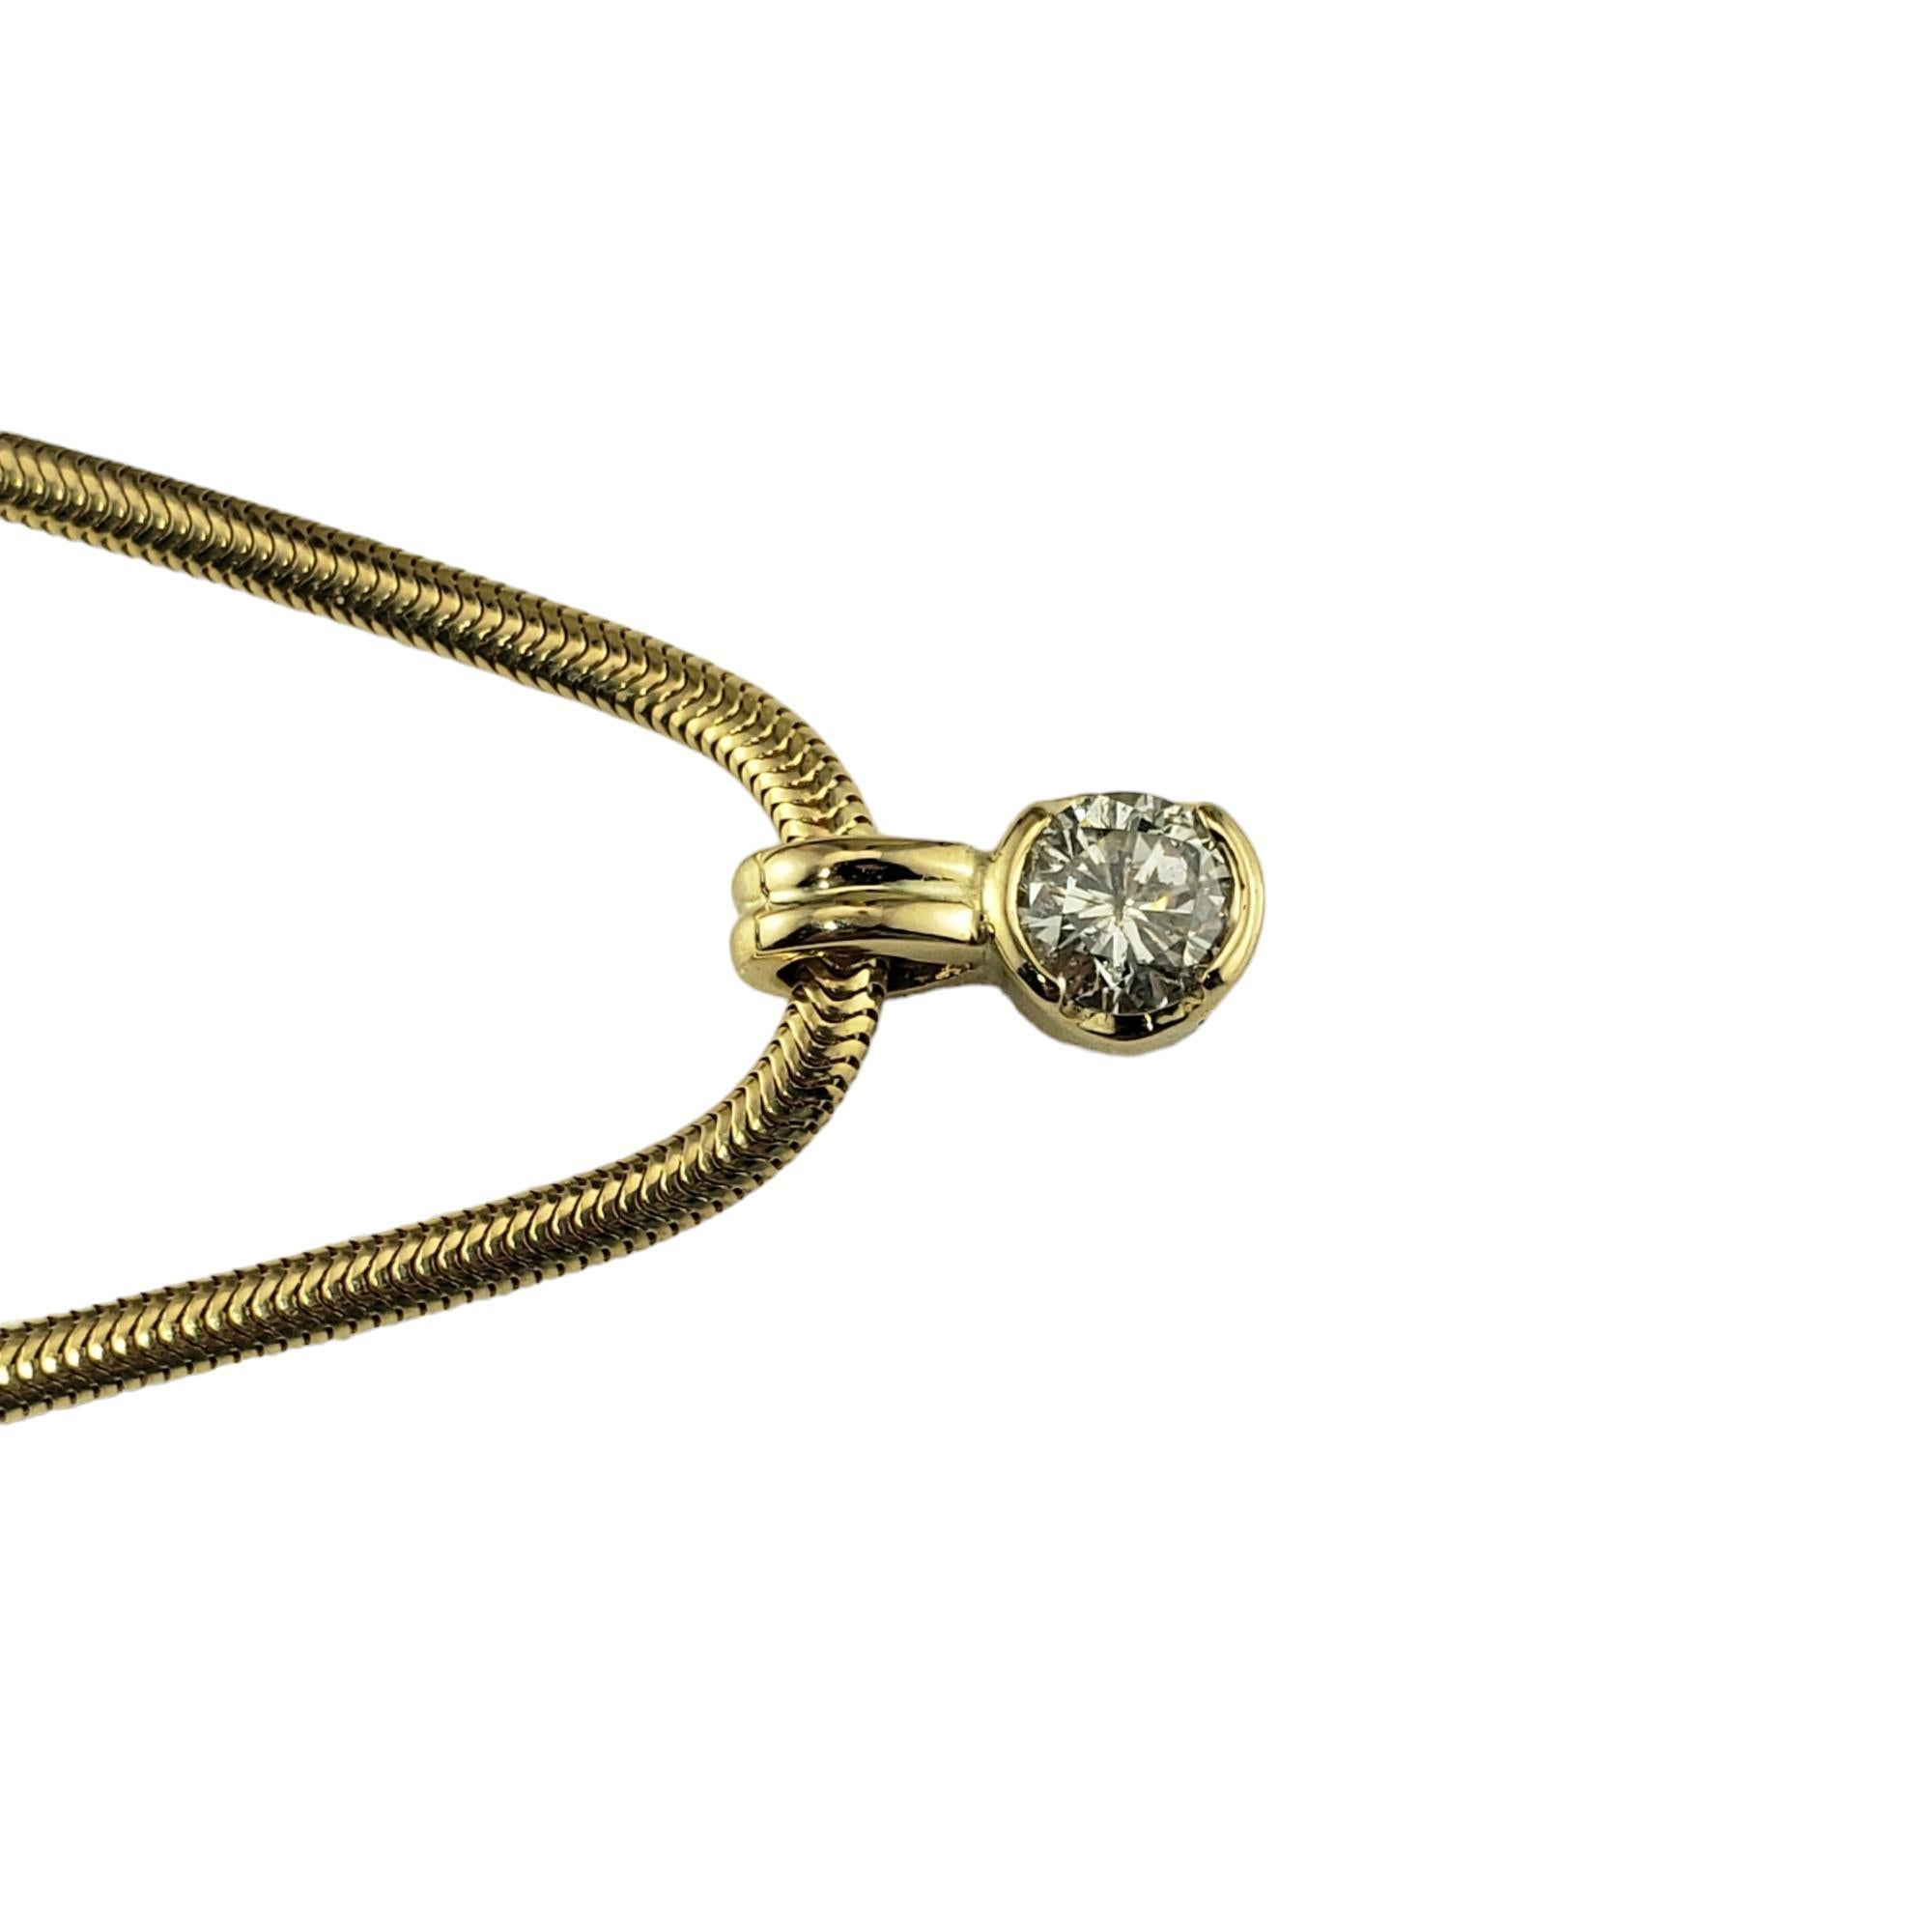 Vintage 14K Yellow Gold Diamond Pendant Necklace-

This lovely pendant features one round brilliant cut diamond set in a classic snake chain necklace.

Approximate total diamond weight: .50 ct.

Diamond color: I

Diamond clarity: I2

Size:  11.5 mm